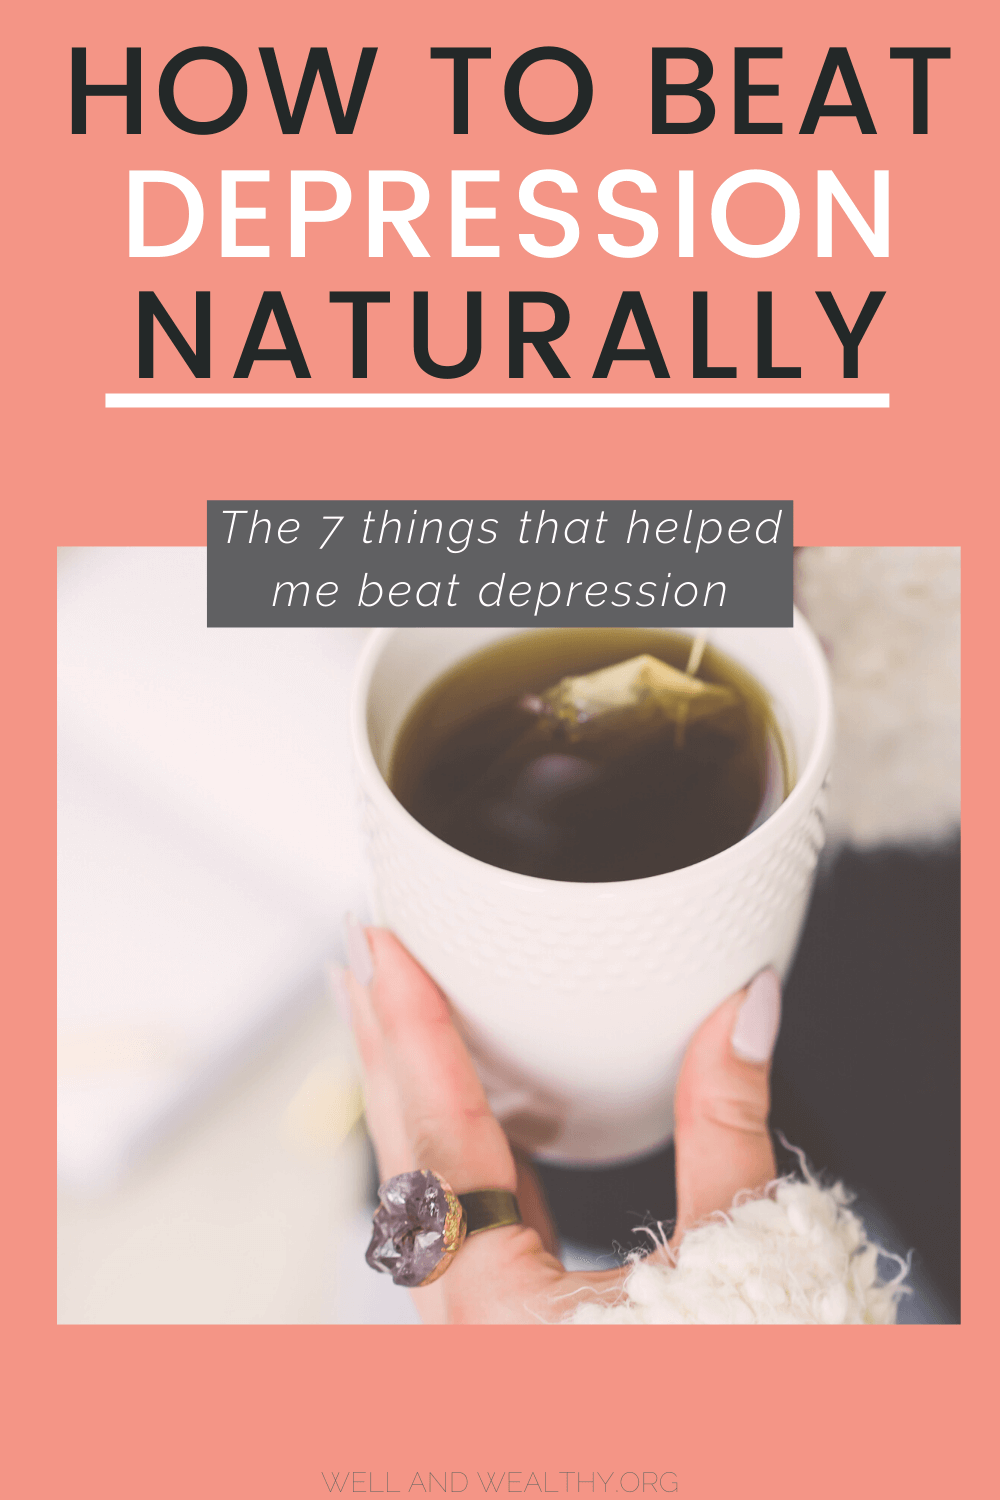 How to Depression Naturally Without Drugs [These